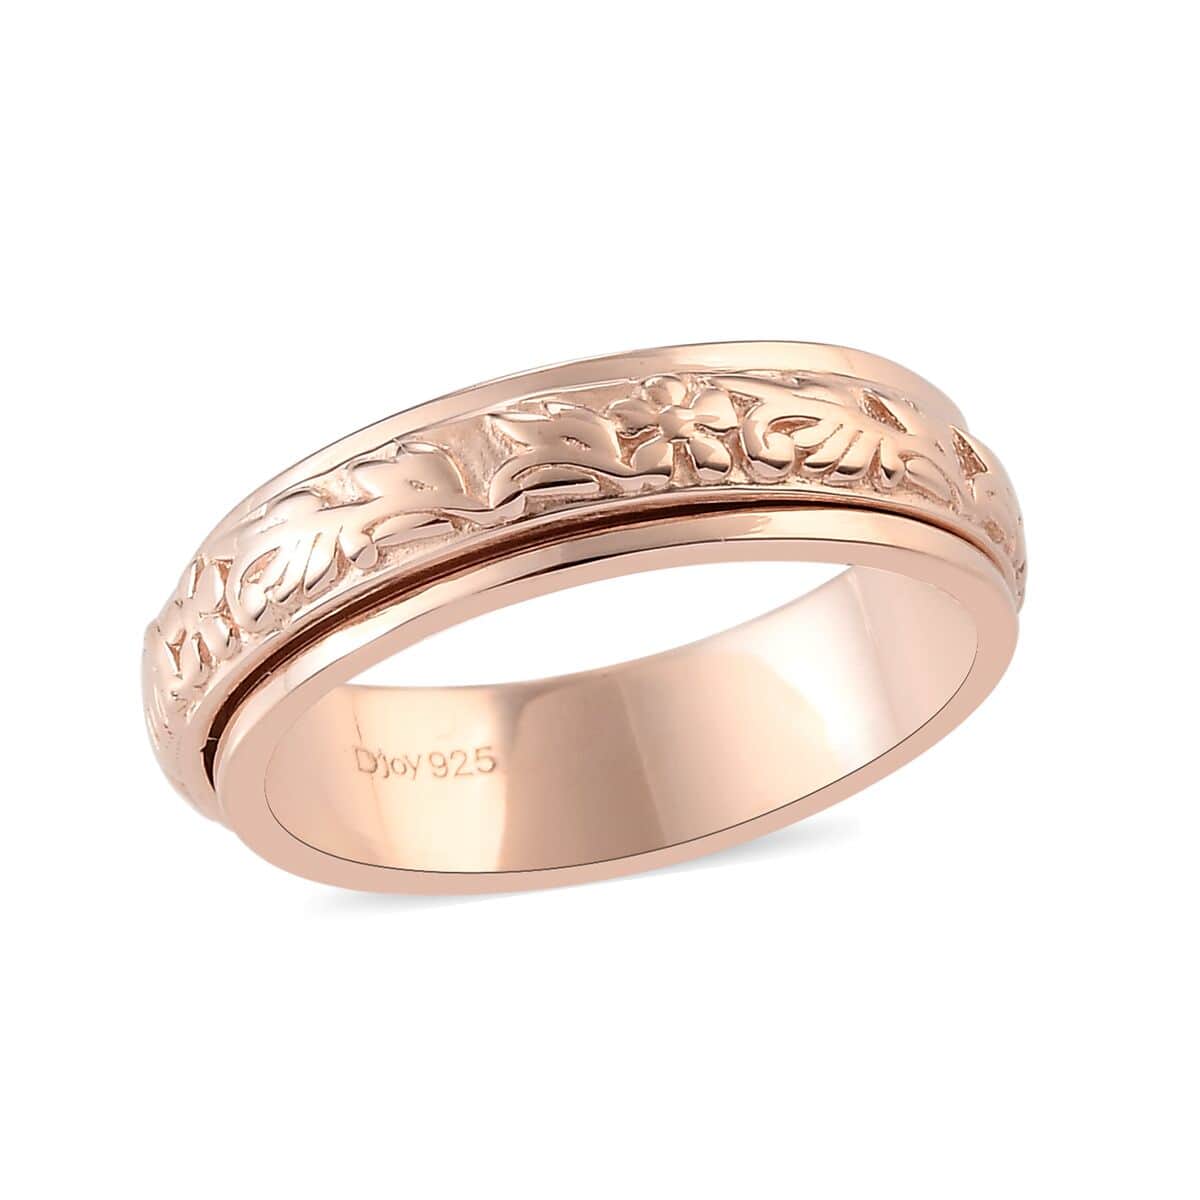 Floral Fidget Spinner Ring for Anxiety in Vermeil Rose Gold Over Sterling Silver, Anxiety Ring for Women, Fidget Rings for Anxiety, Promise Rings 4.50 Grams (Size 8.00) image number 0